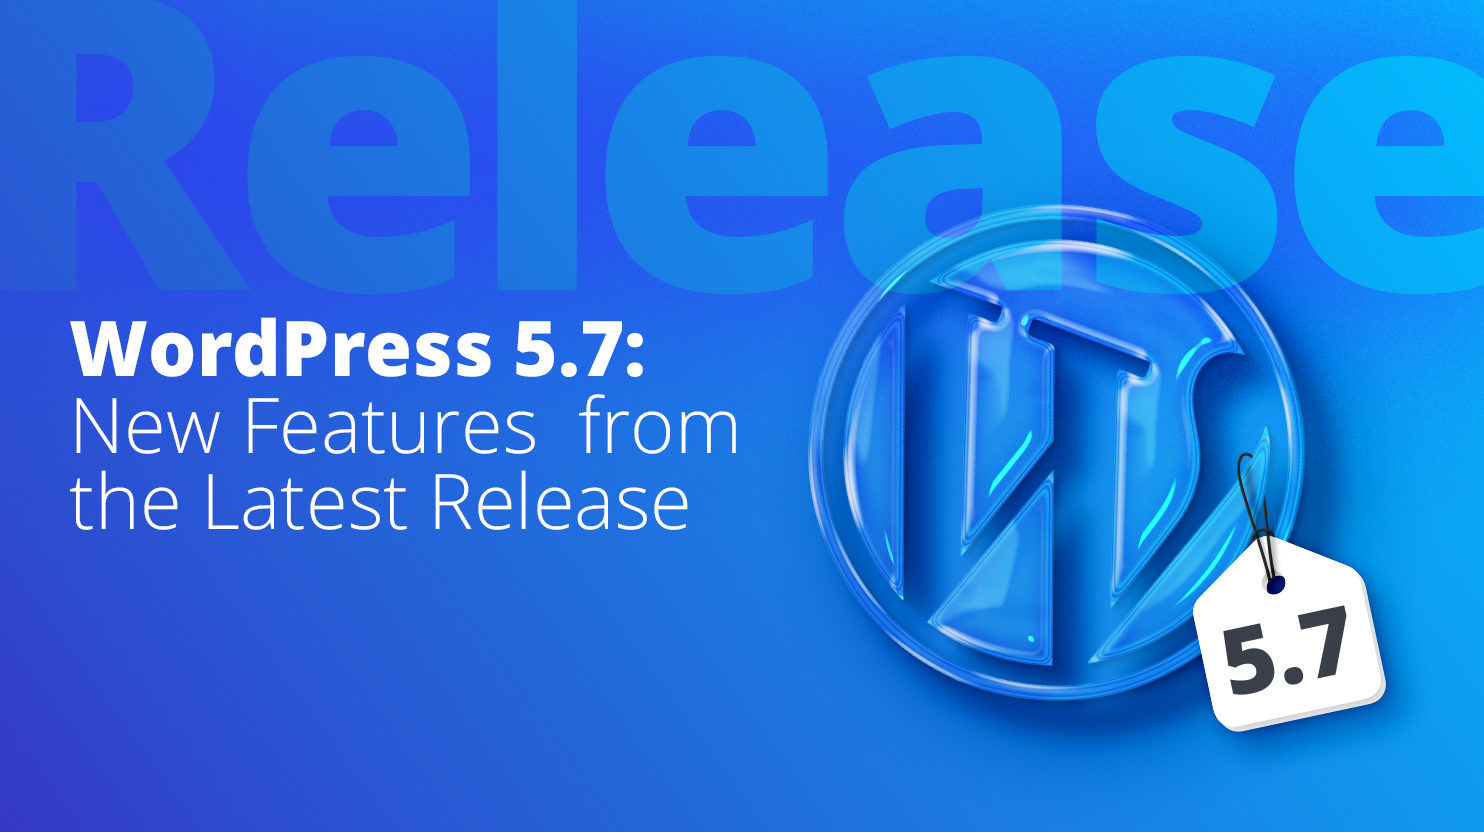 WordPress 5.7 New Features from the Latest Release